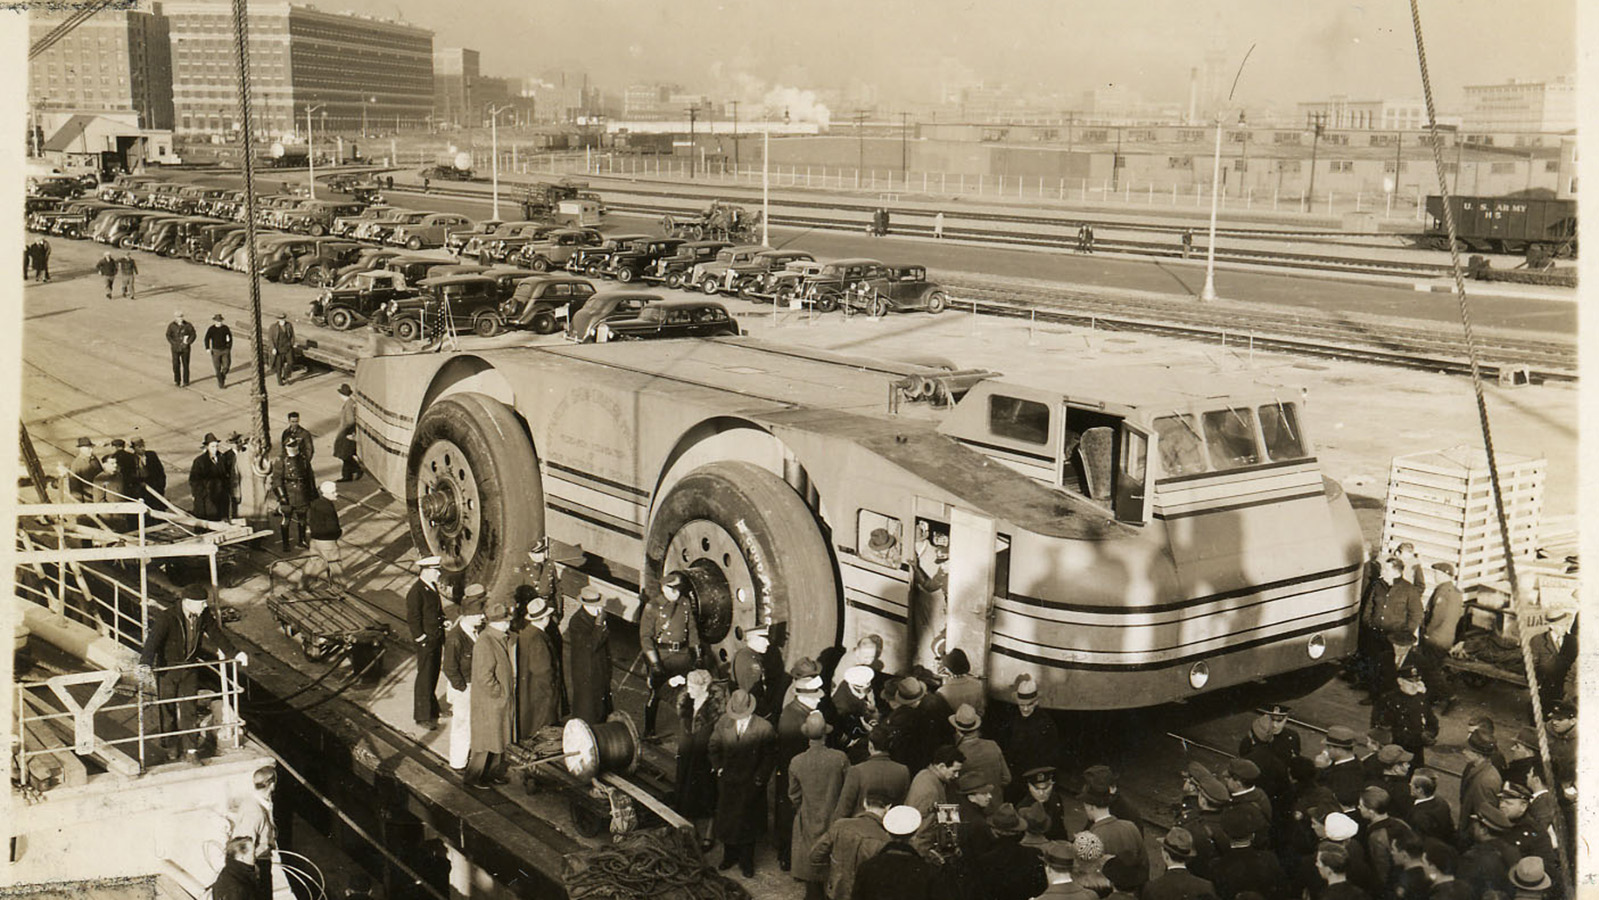 black and white photo of a snow cruiser in a city surrounded by a crowd of people